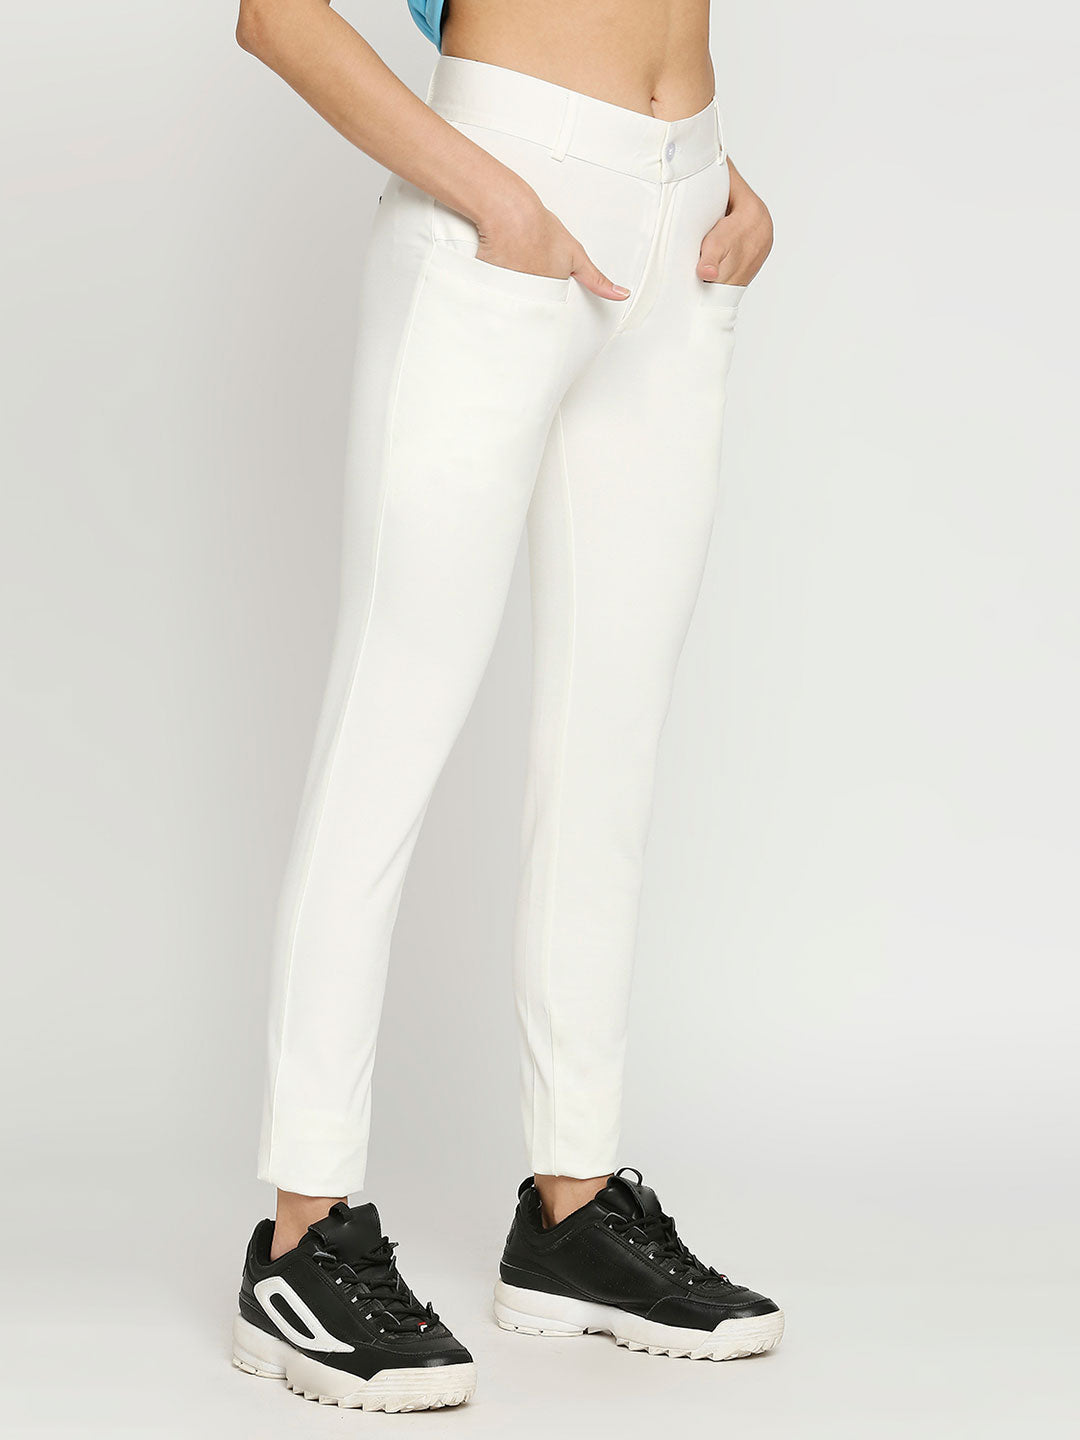 Women's Golf Pants with Welt Pockets - White